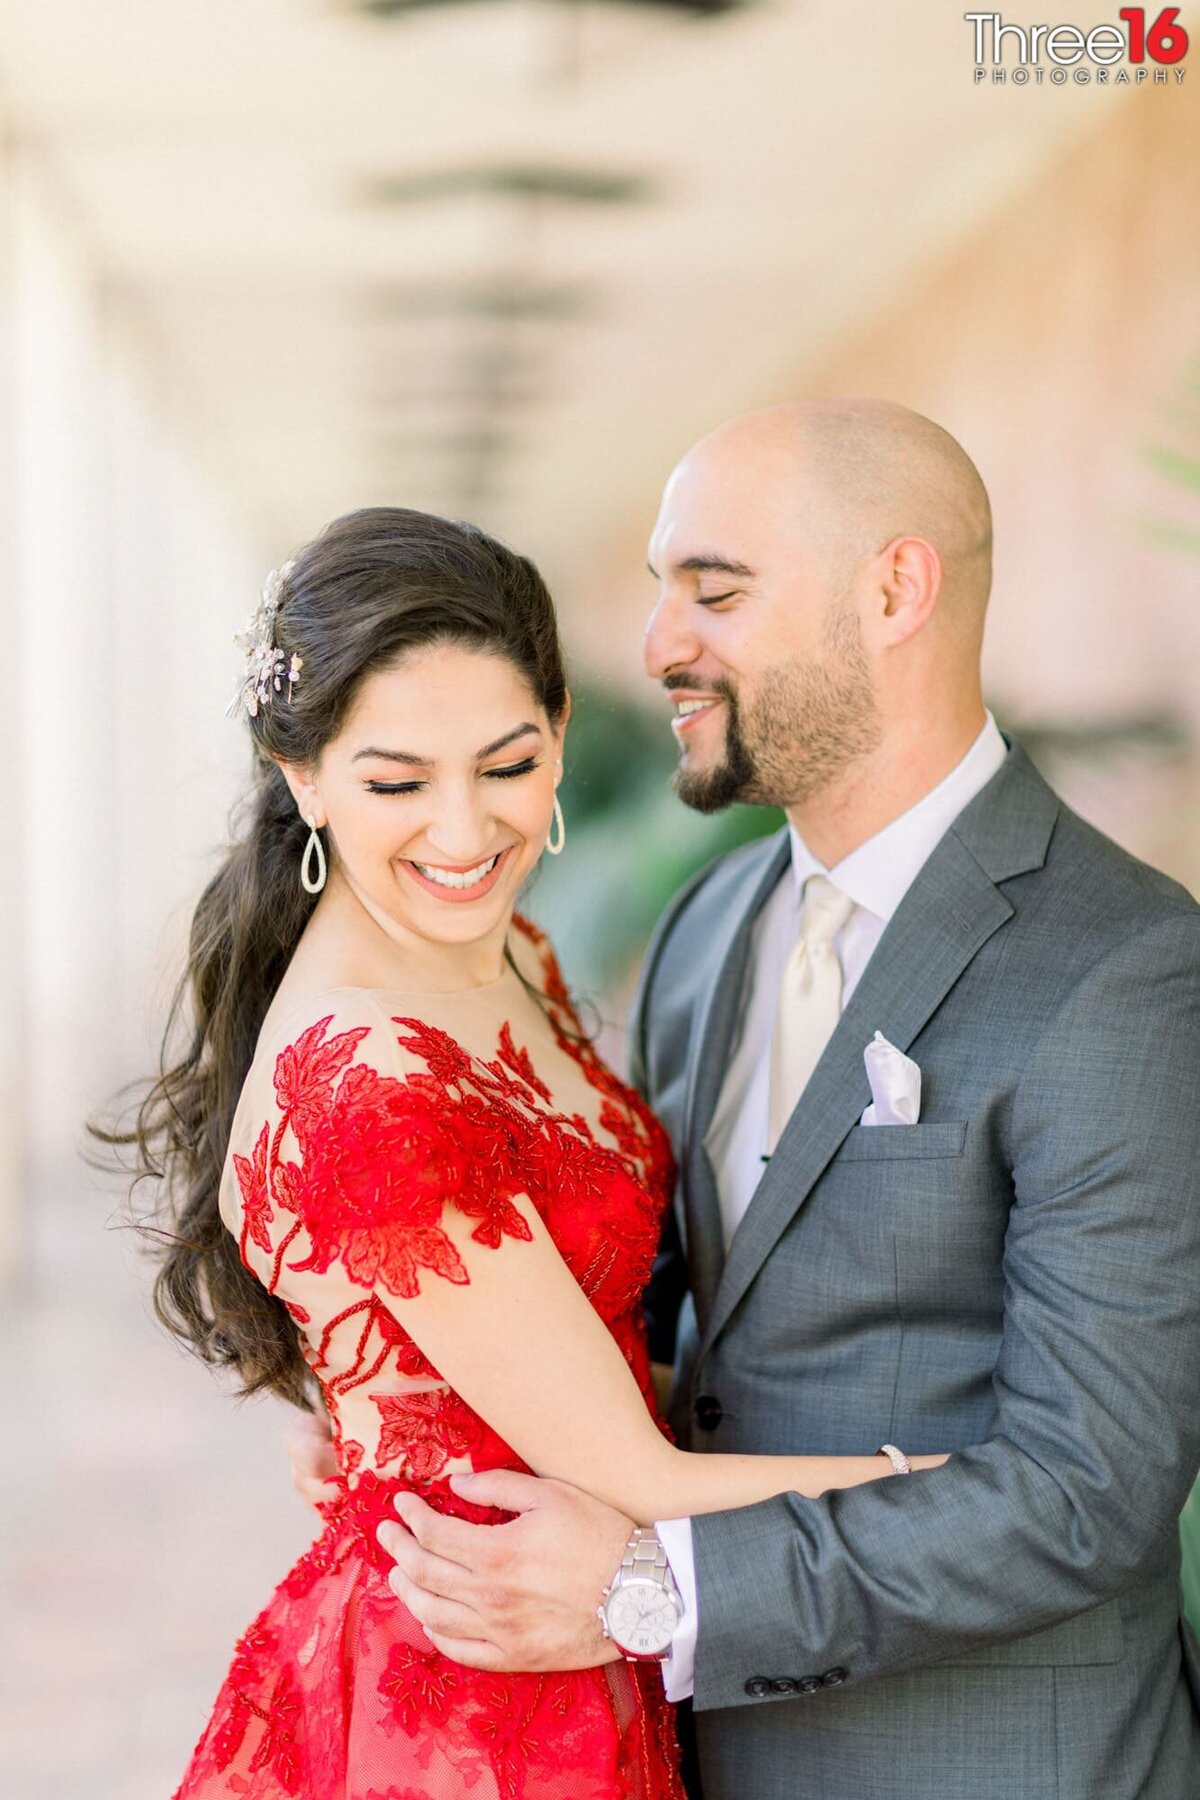 Groom to be makes his Bride laugh while embracing each other